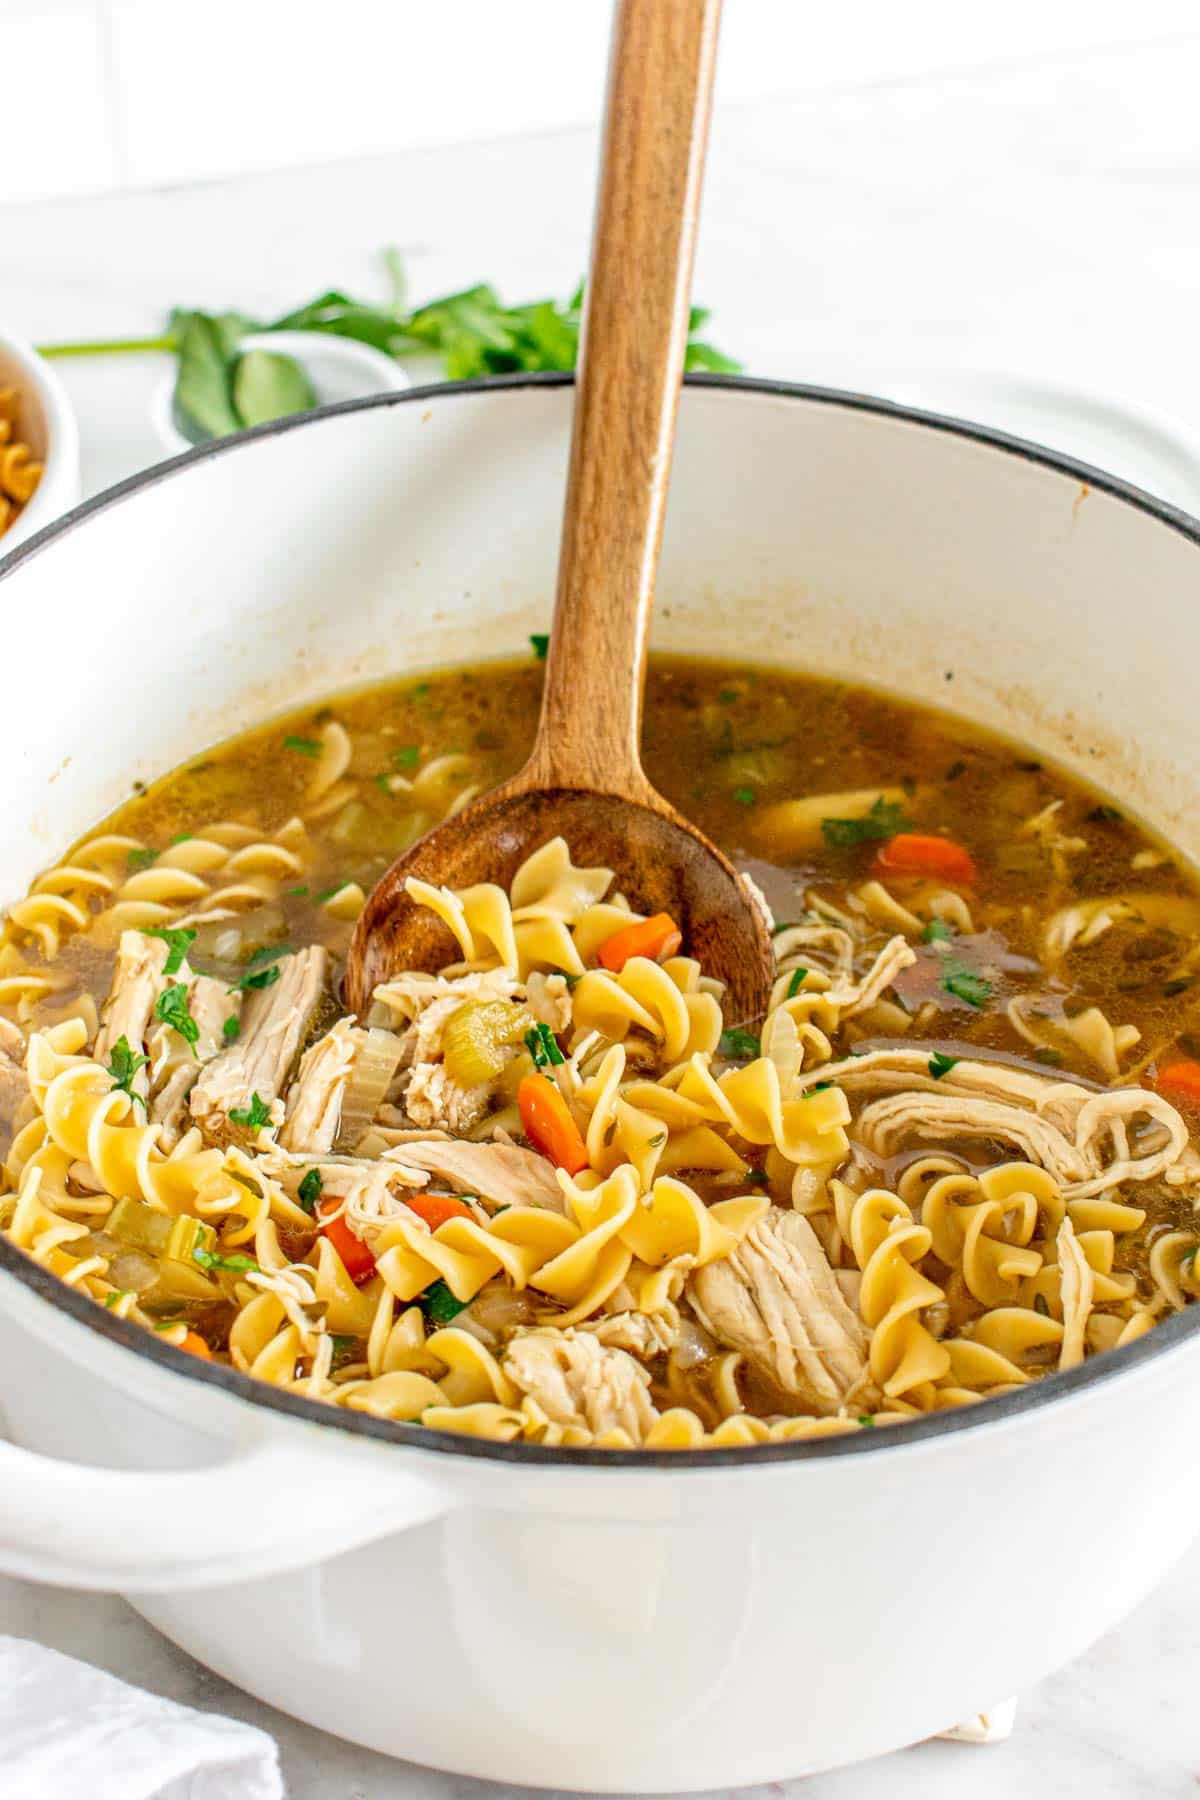 A wooden spoon lifting noodles from a pot of chicken noodle soup, garnished with herbs.